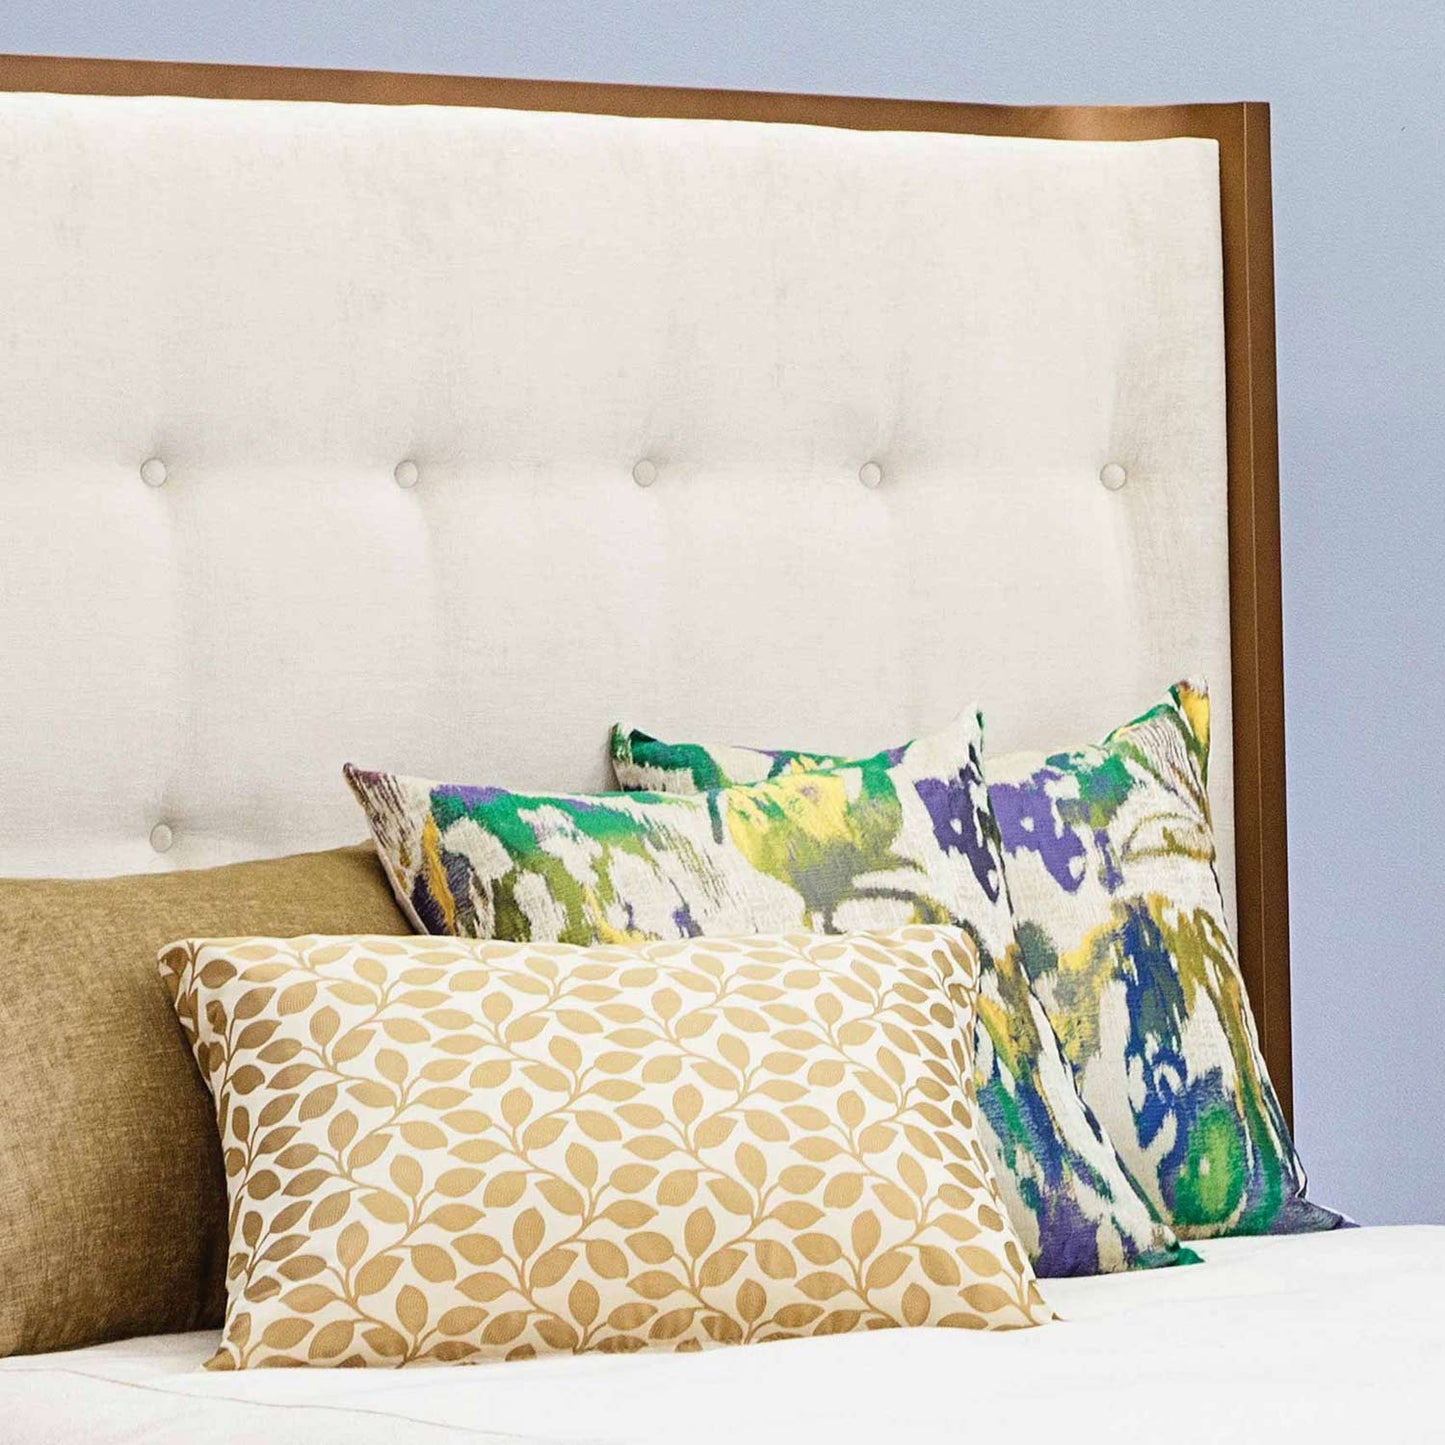 Broadway Upholstered Iron Headboard Upholstered Surround 1202 Wesley Allen Queen HBFS White Fabric Matriae